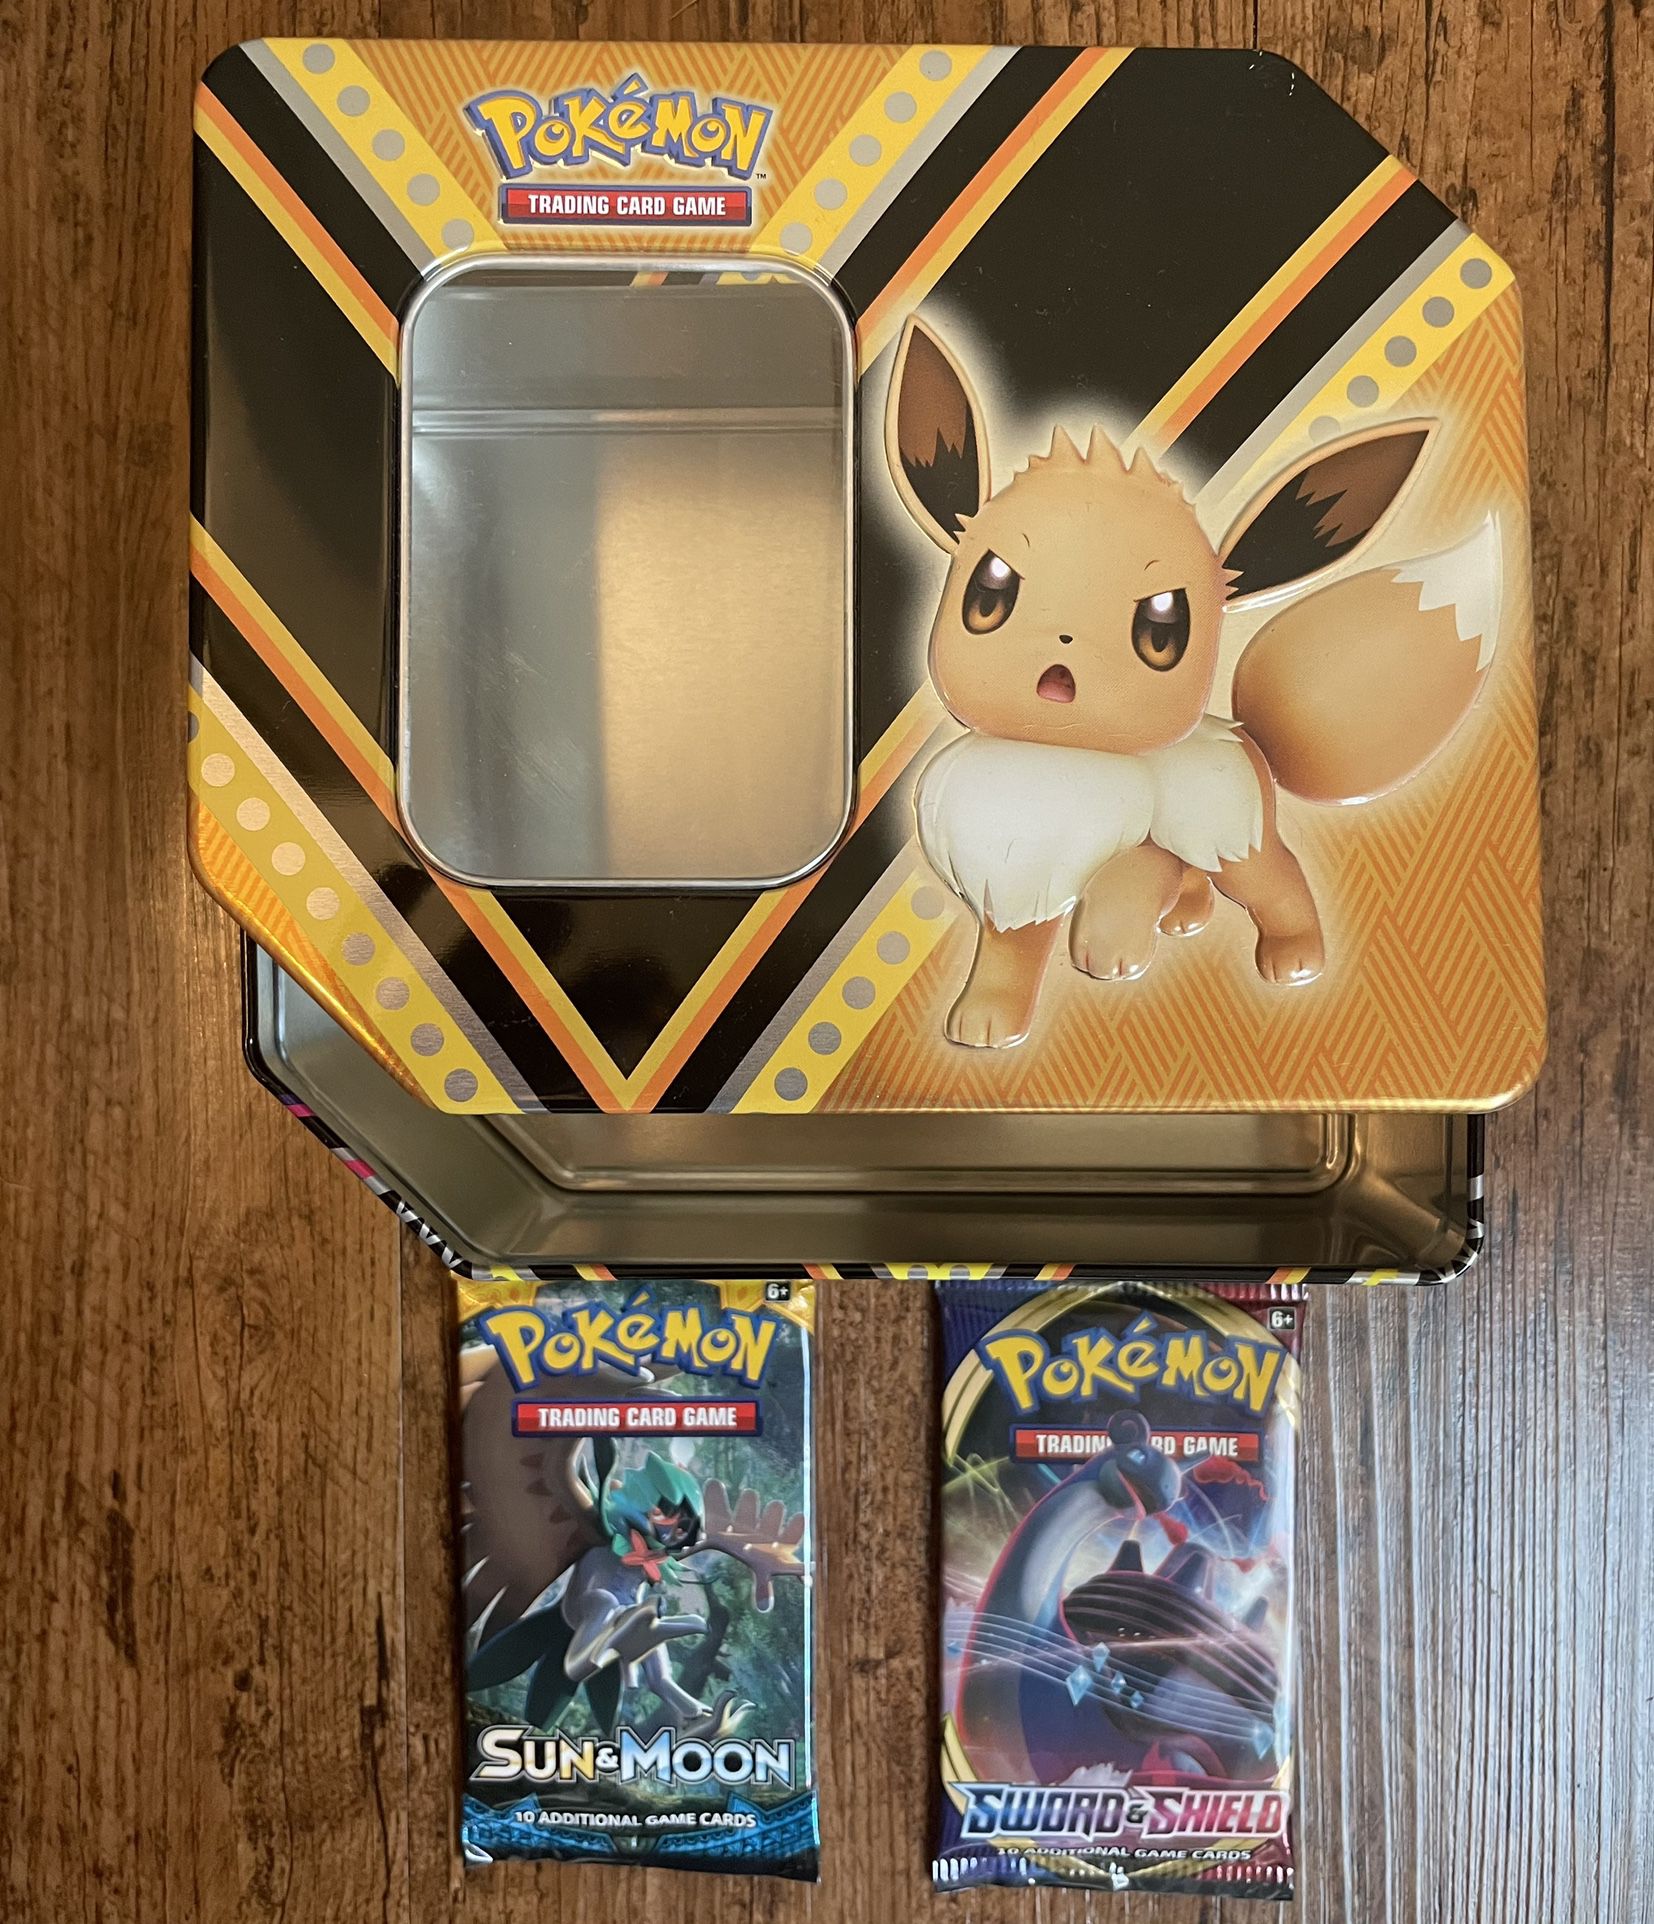 Lot Tin And two sealed Pokémon TCG packs - one eavh of Sword and Shield & Sun and Moon base set Booster Packs. Sun and Moon base set Booster Packs